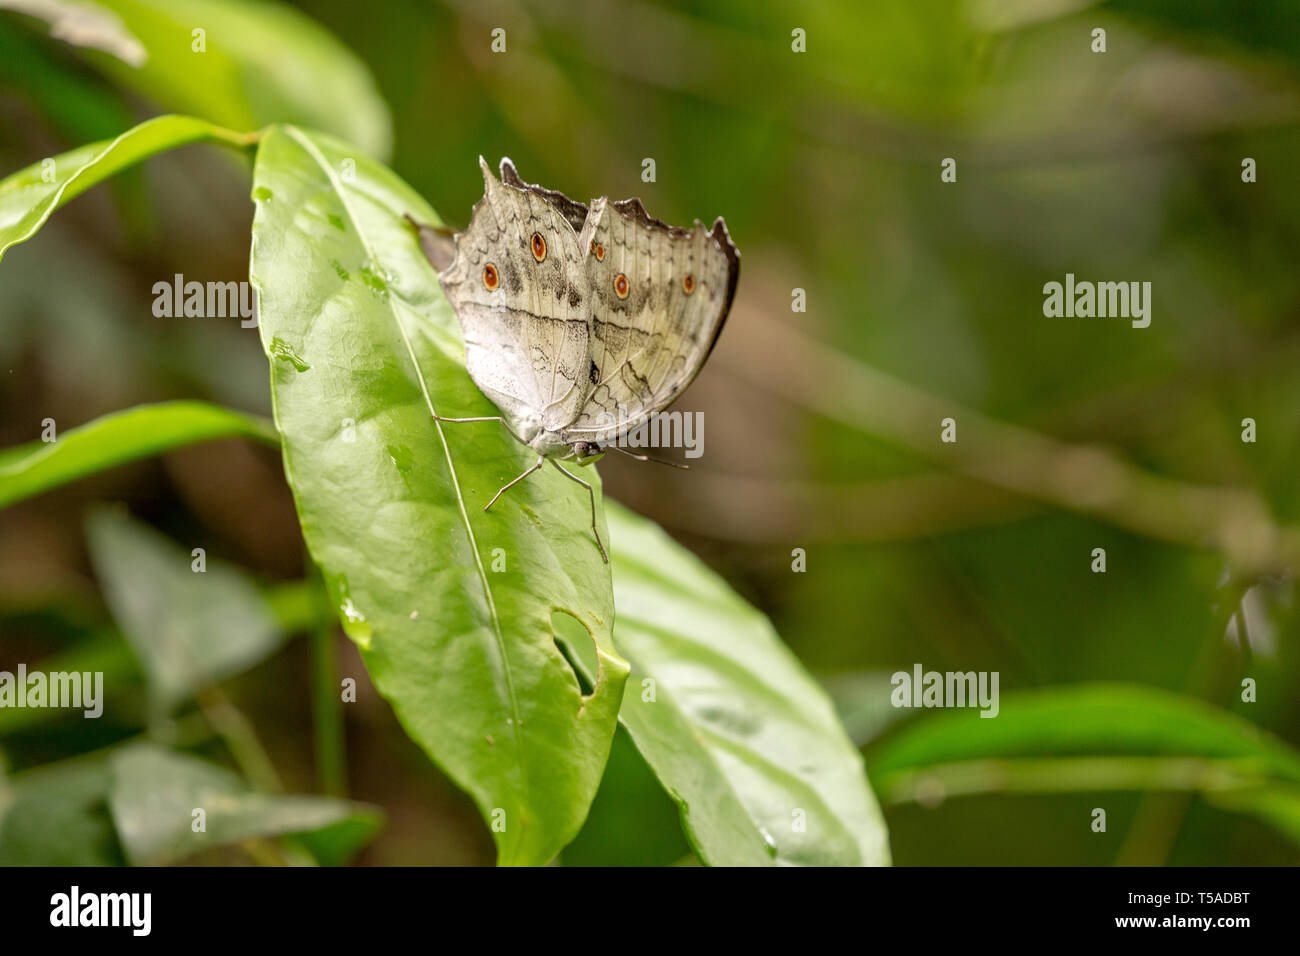 Butterfly perched on a leaf Stock Photo